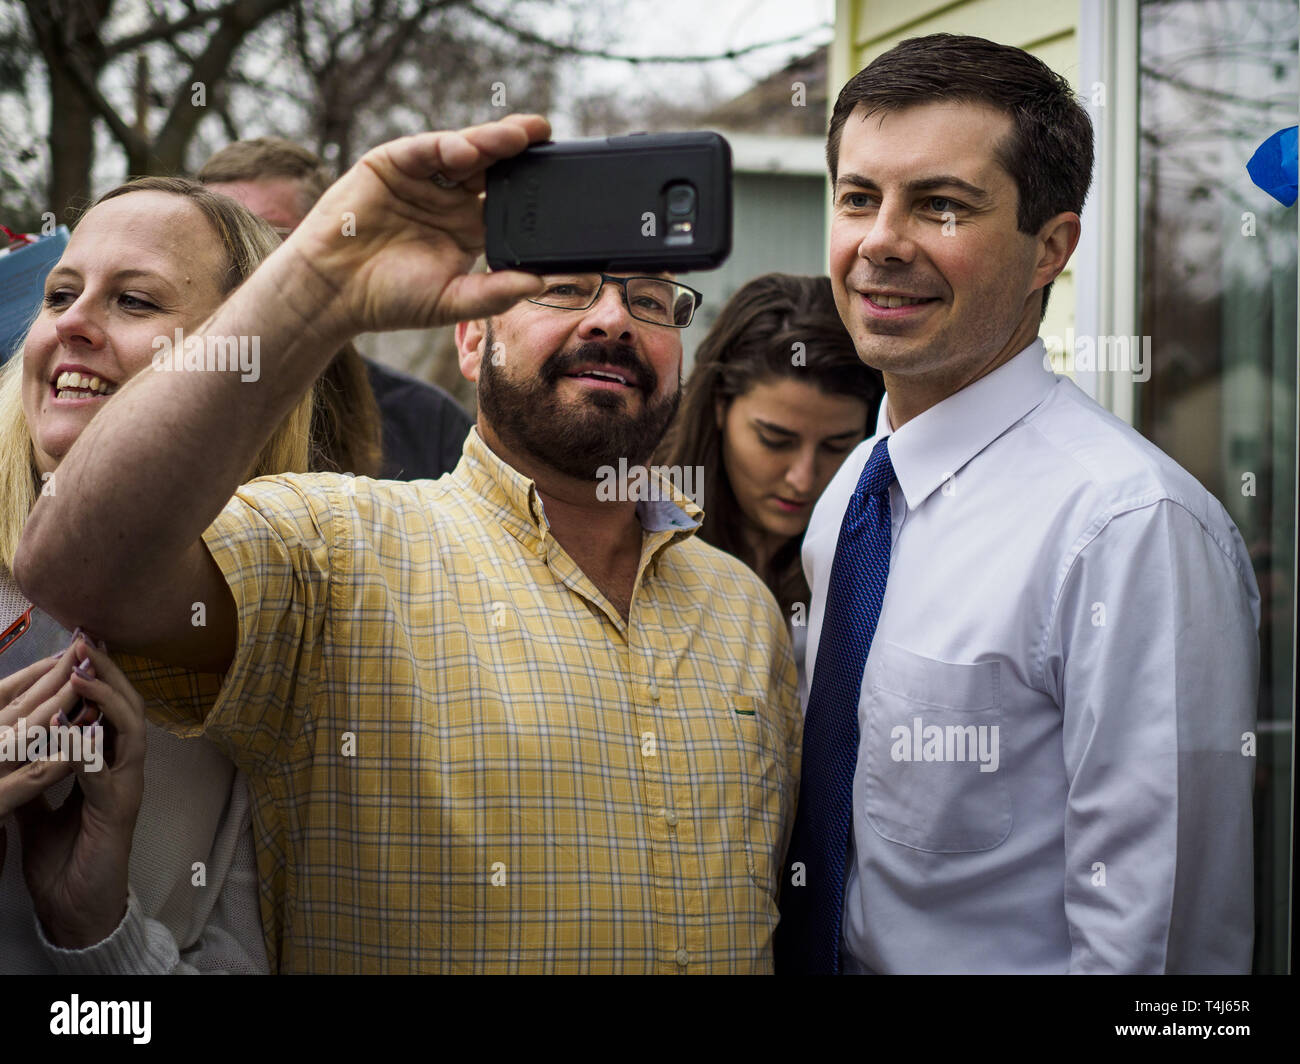 April 17, 2019 - Marshalltown, Iowa, U.S - Mayor PETE BUTTIGIEG poses for a selfie with a voter after a meet and greet at home in Marshalltown, Iowa. People came from as far away as Minneapolis, Minnesota and Rockford, Illinois to meet the mayor of South Bend, Indiana. ''Mayor Pete, '' as he goes by, declared his candidacy to be the Democratic nominee for the US Presidency on April 14. Buttigieg is touring Iowa this week. Iowa traditionally hosts the the first selection event of the presidential election cycle. The Iowa Caucuses will be on Feb. 3, 2020. Credit: ZUMA Press, Inc./Alamy Live News Stock Photo